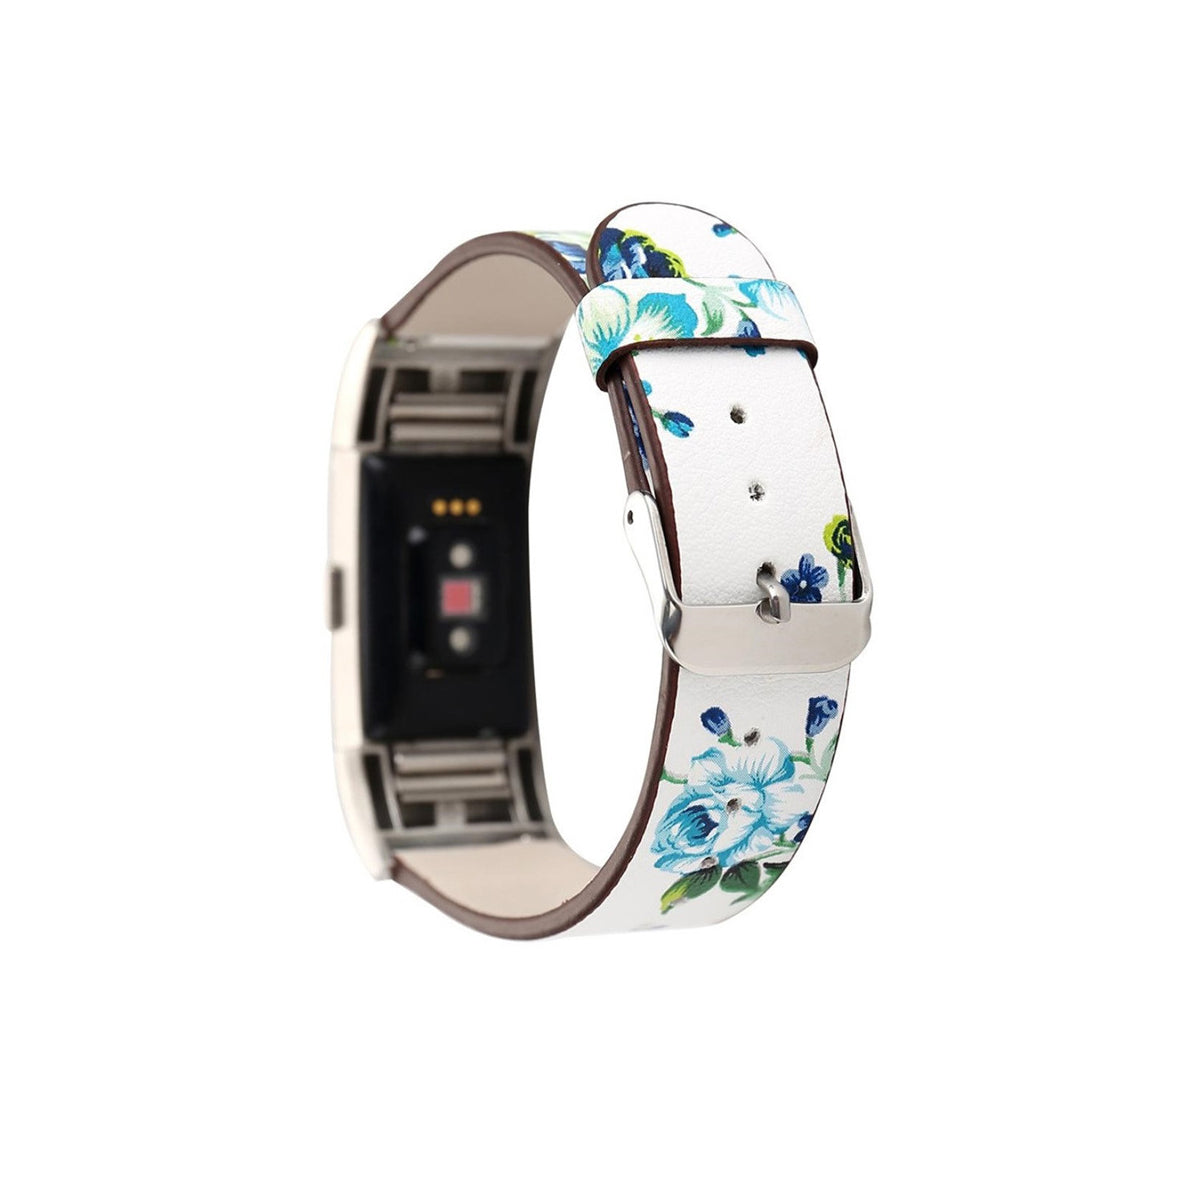 Designer Leather Fitbit Charge 2 Replacement Band with Buckle White + Blue Flowers  